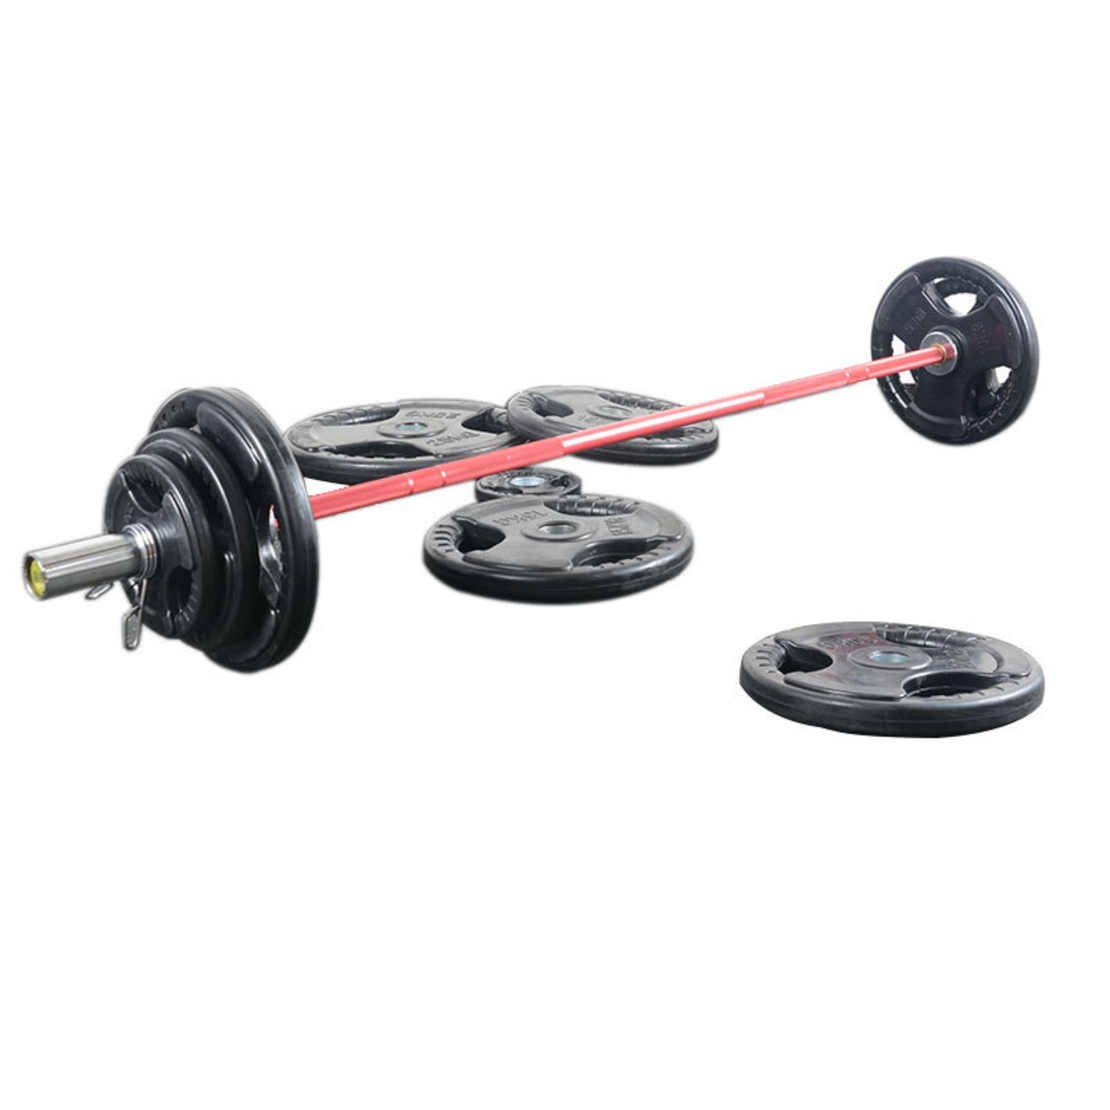  weight plate 10 kg